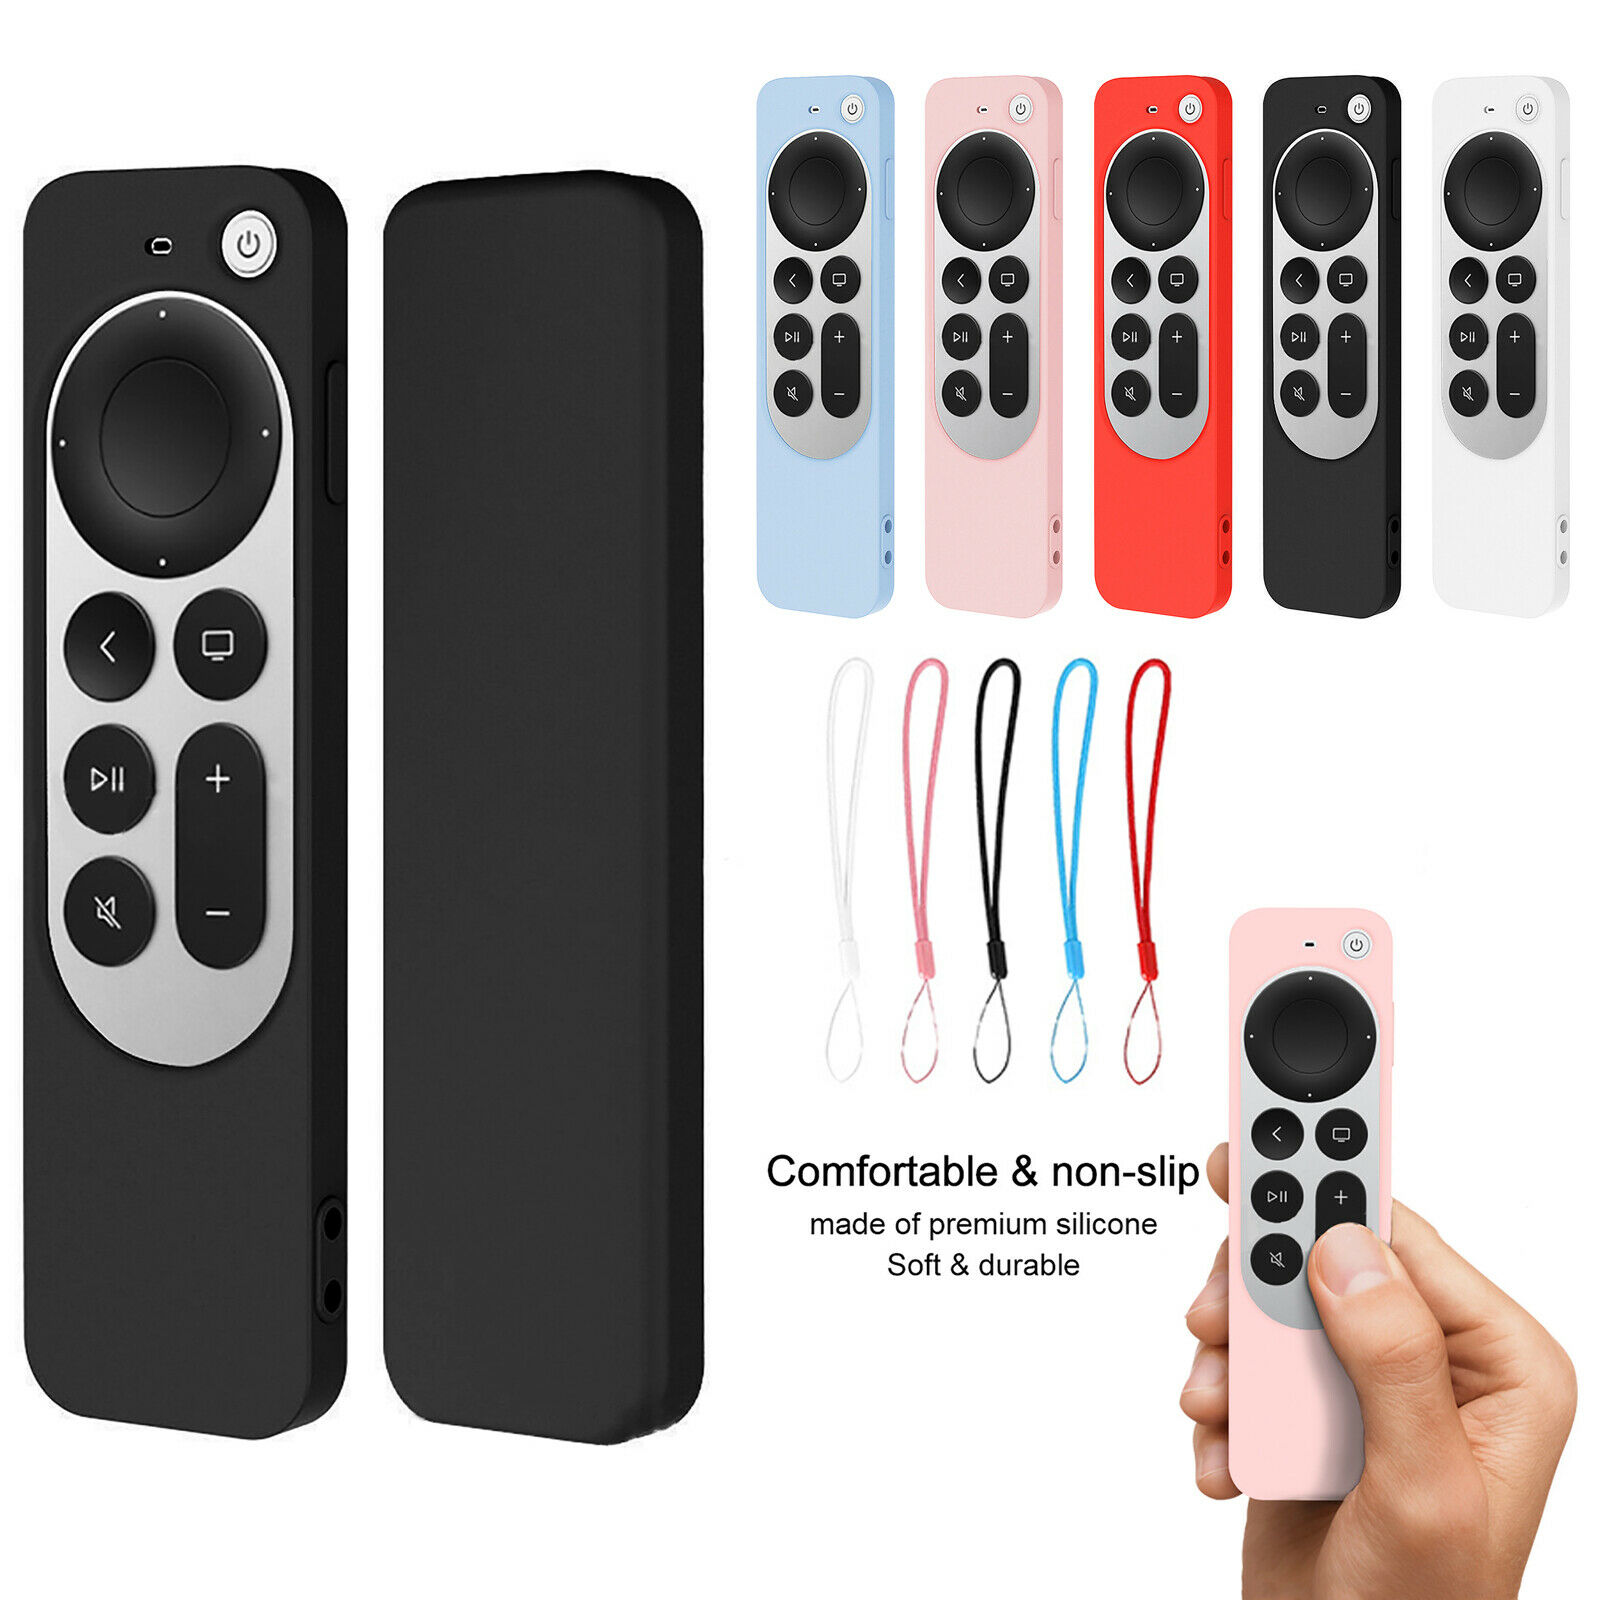 HONEYDEWD 2021 Stripe Shockproof Protective shell Remote Controller Protect Case For Apple TV 4K Remote Controller Protective Silicone Cover